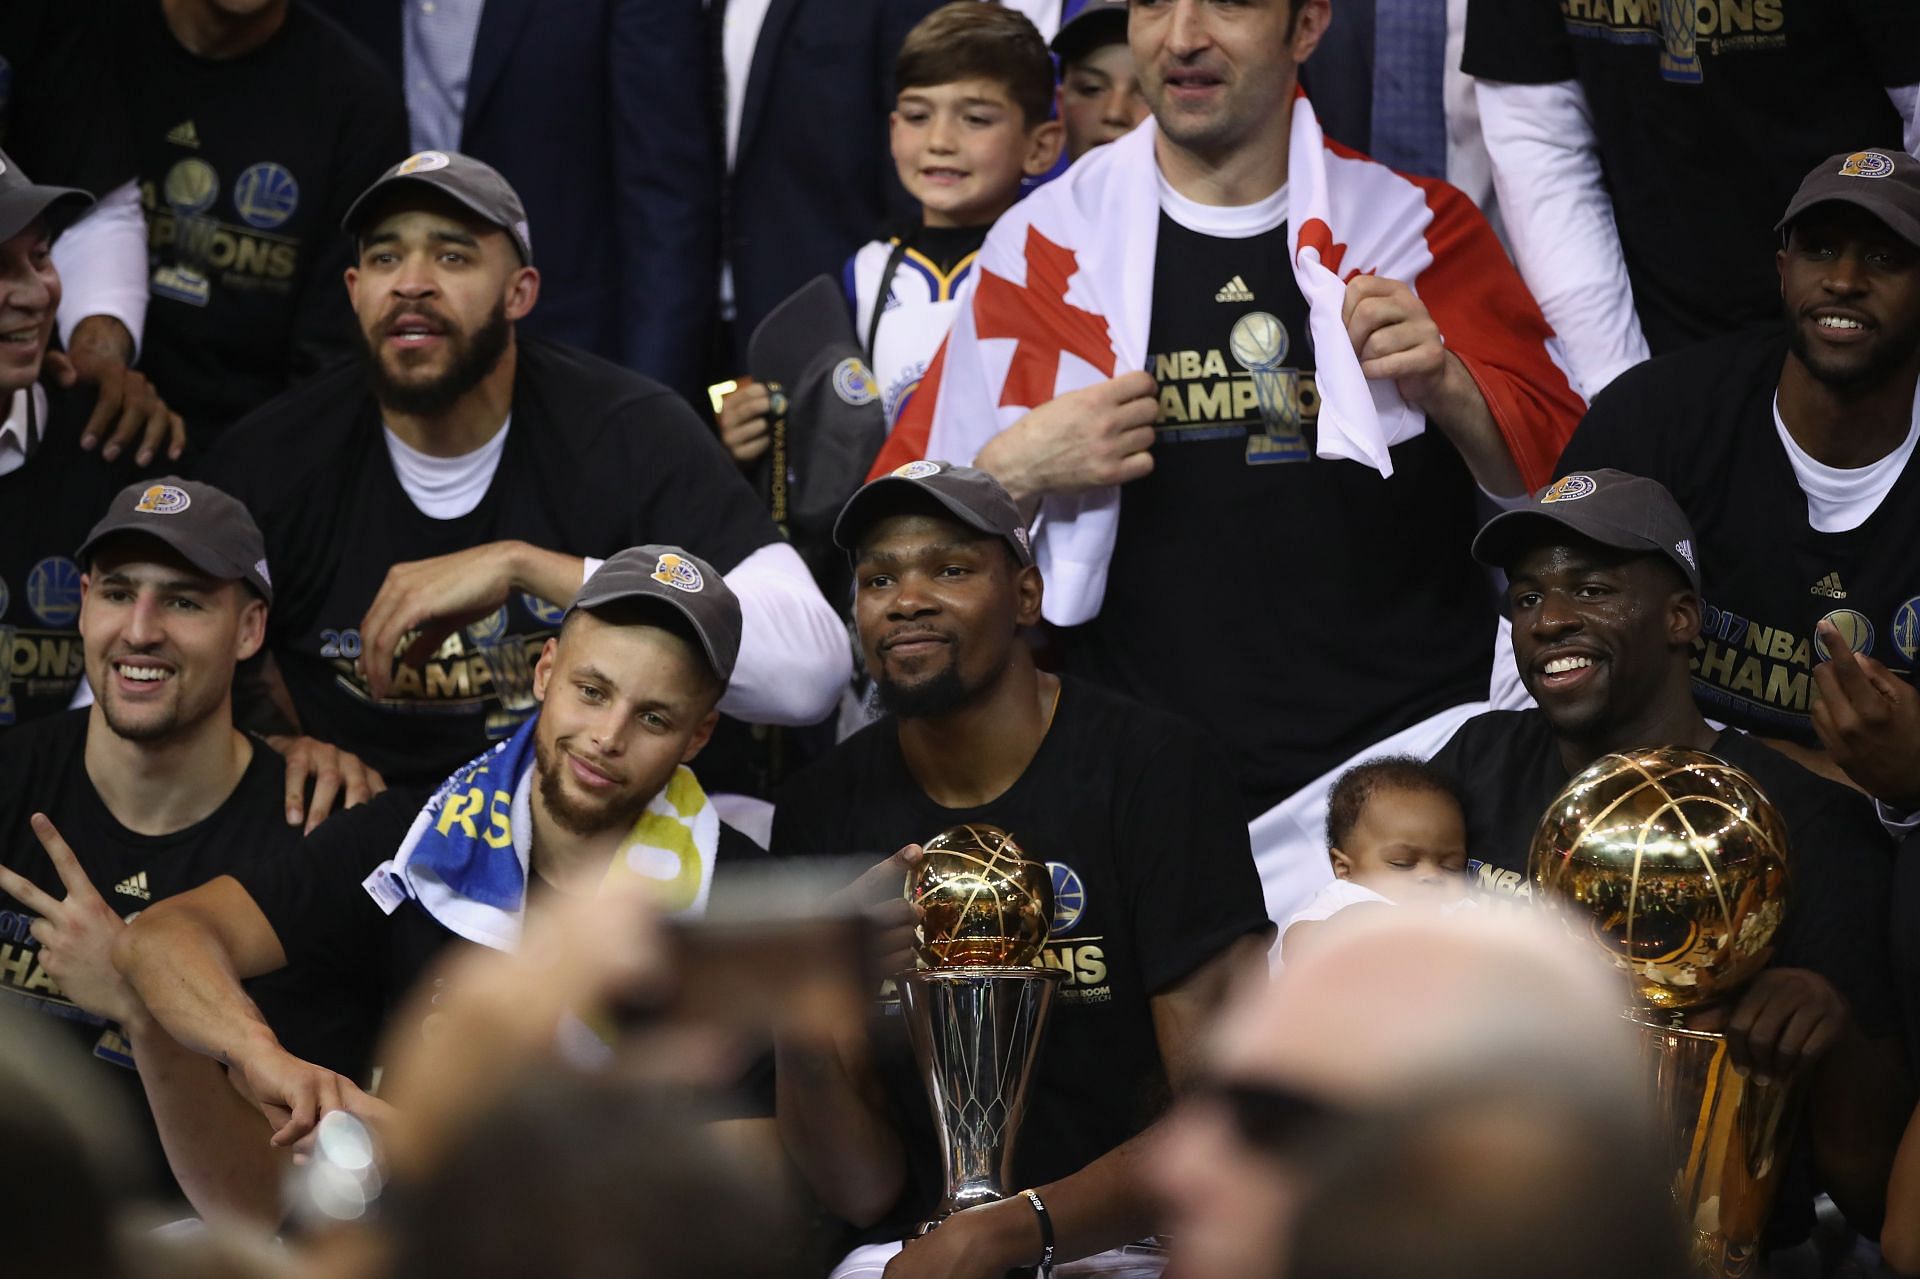 Colin Cowherd believes that a Golden State Warriors reunion is possible for Durant, but he must want it.